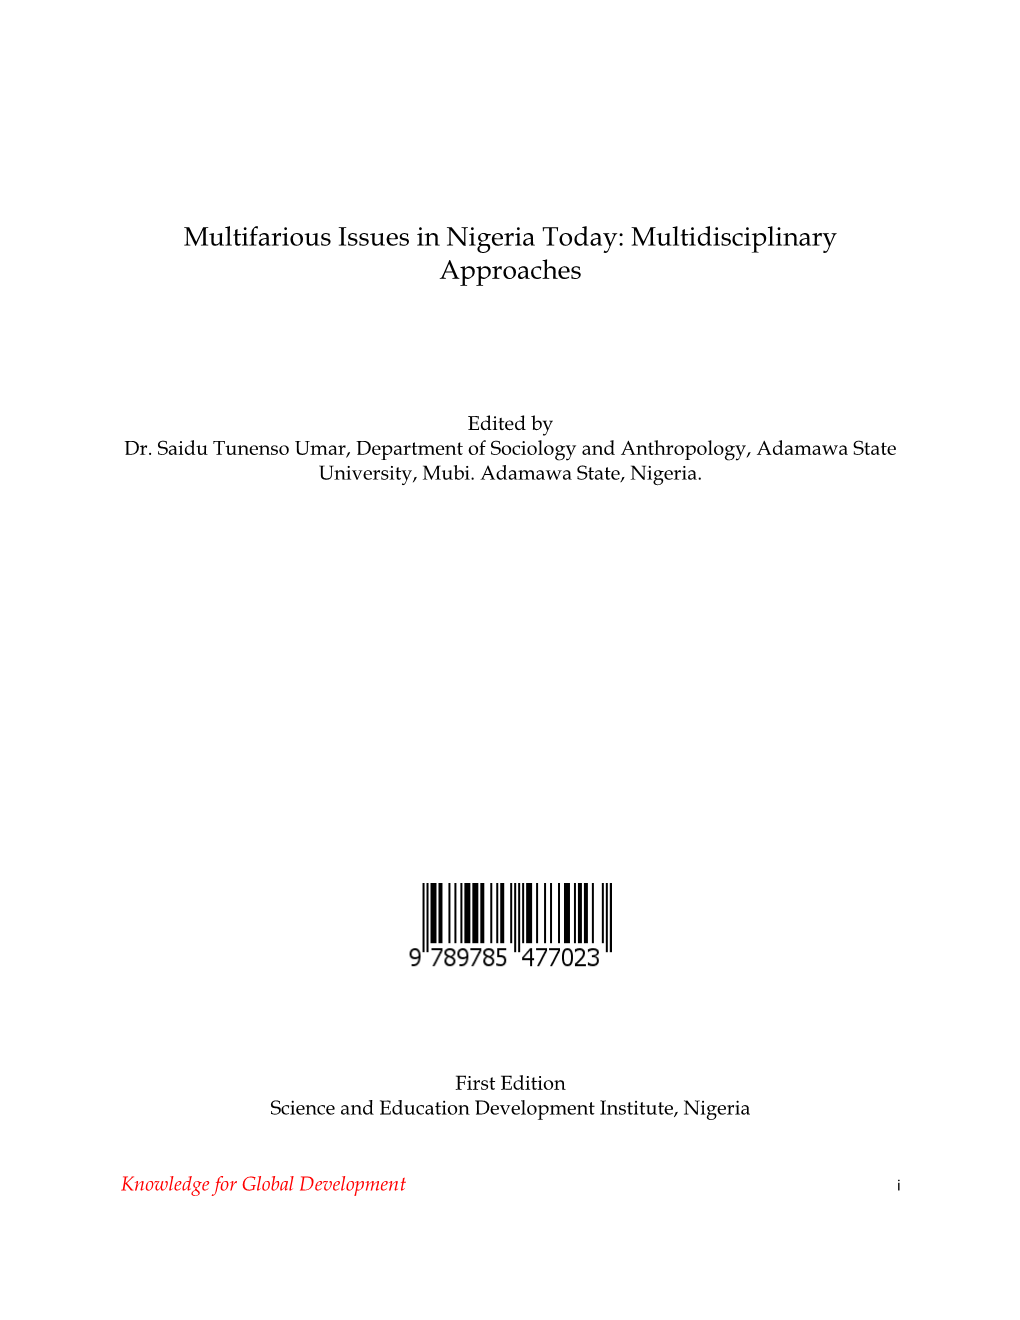 Multifarious Issues in Nigeria Today: Multidisciplinary Approaches